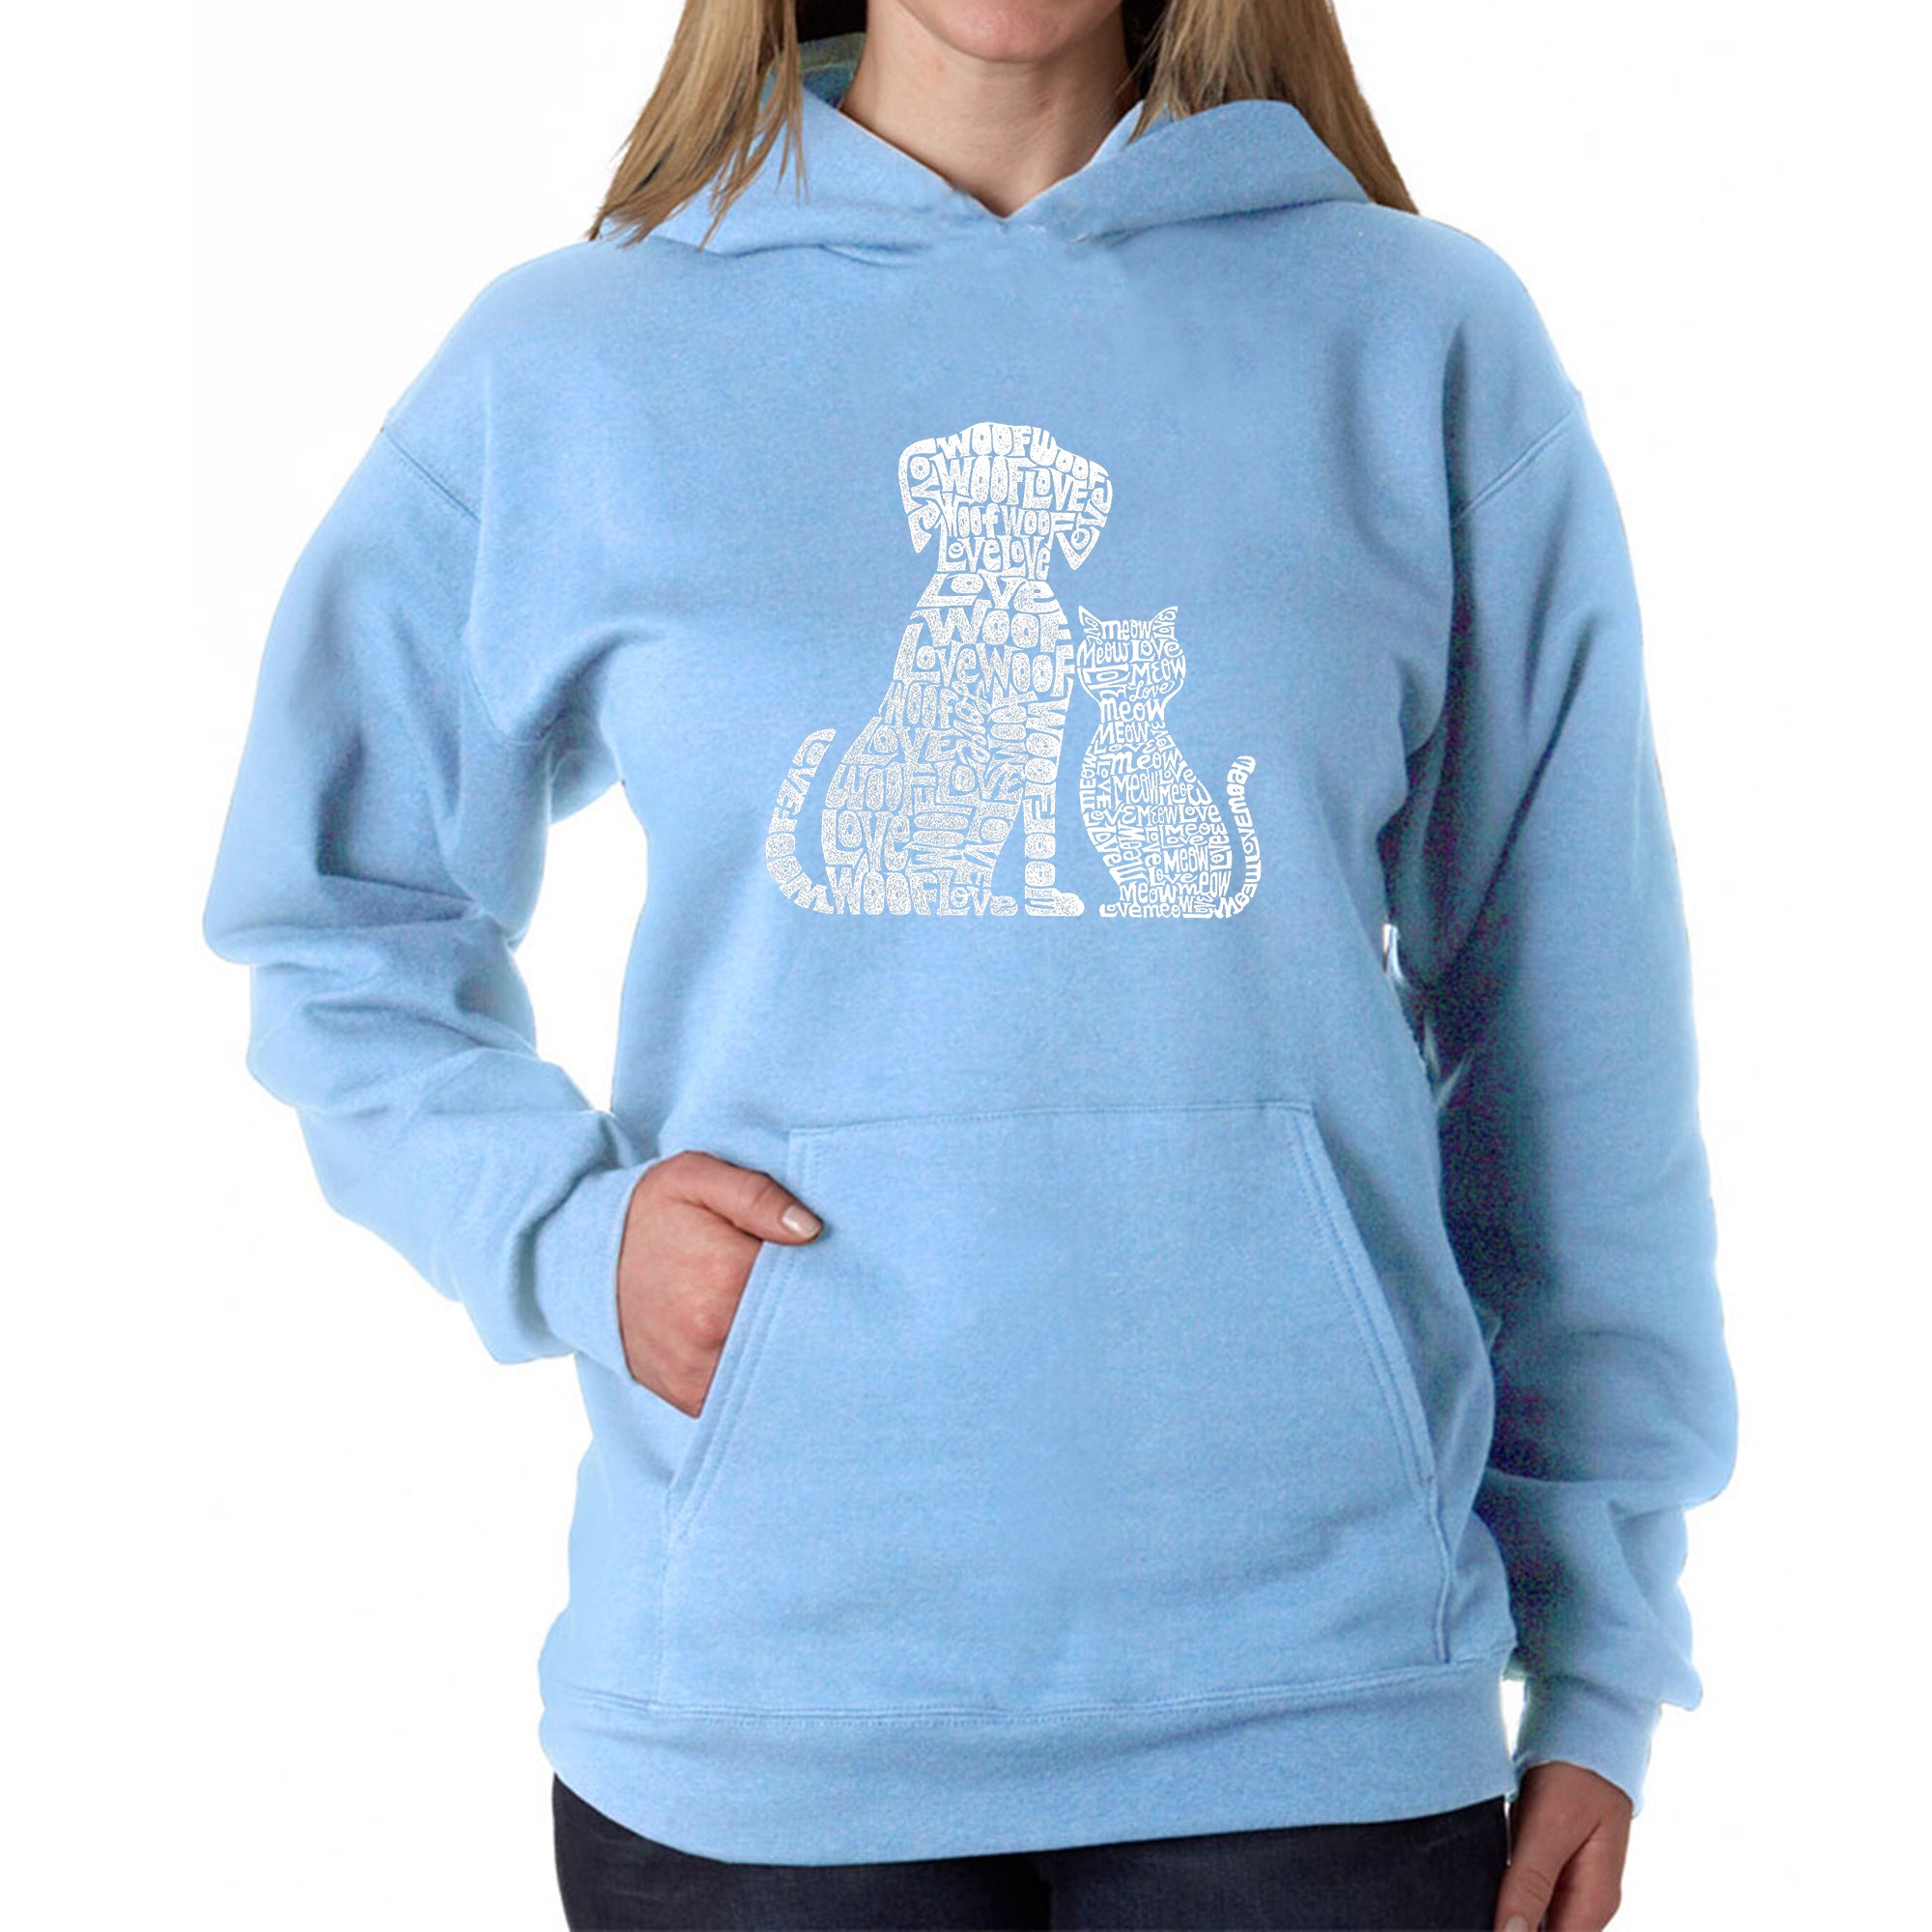 Dogs And Cats - Women's Word Art Hooded Sweatshirt - Blue - Small